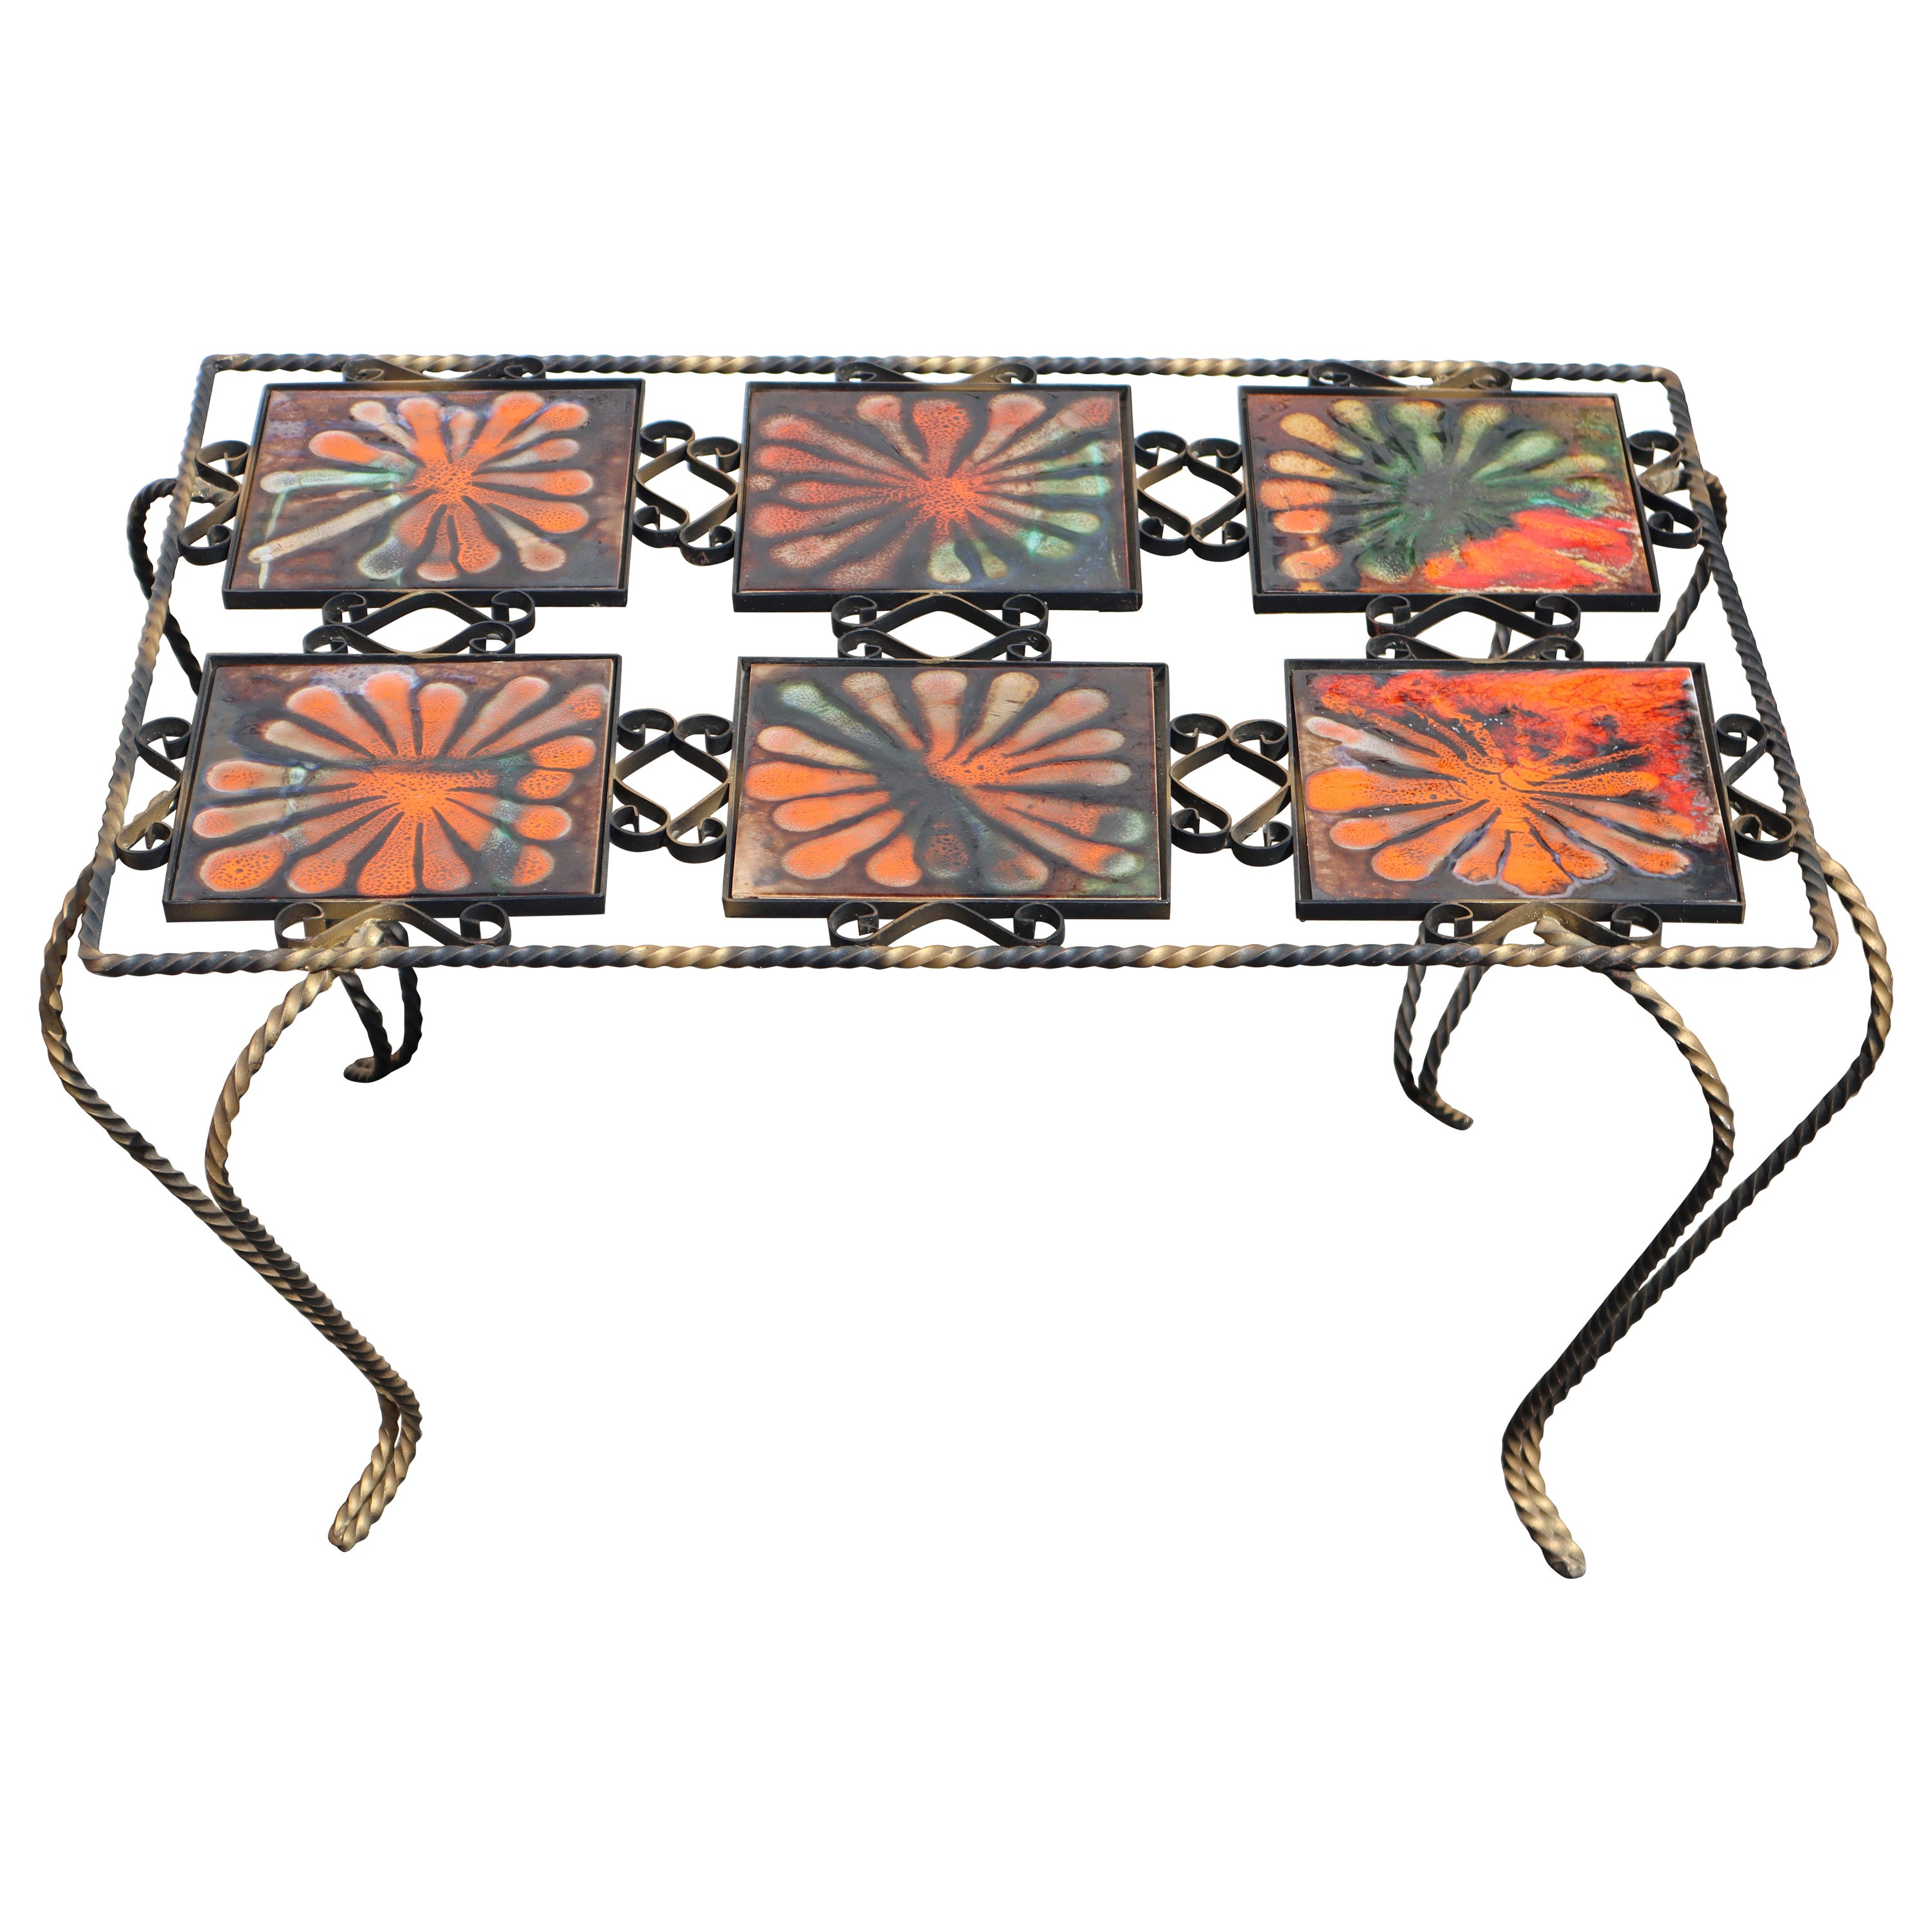 Vintage Mettlach Tiled and Forged Cocktail Table-Coffee Table-Patio Table-1950s For Sale